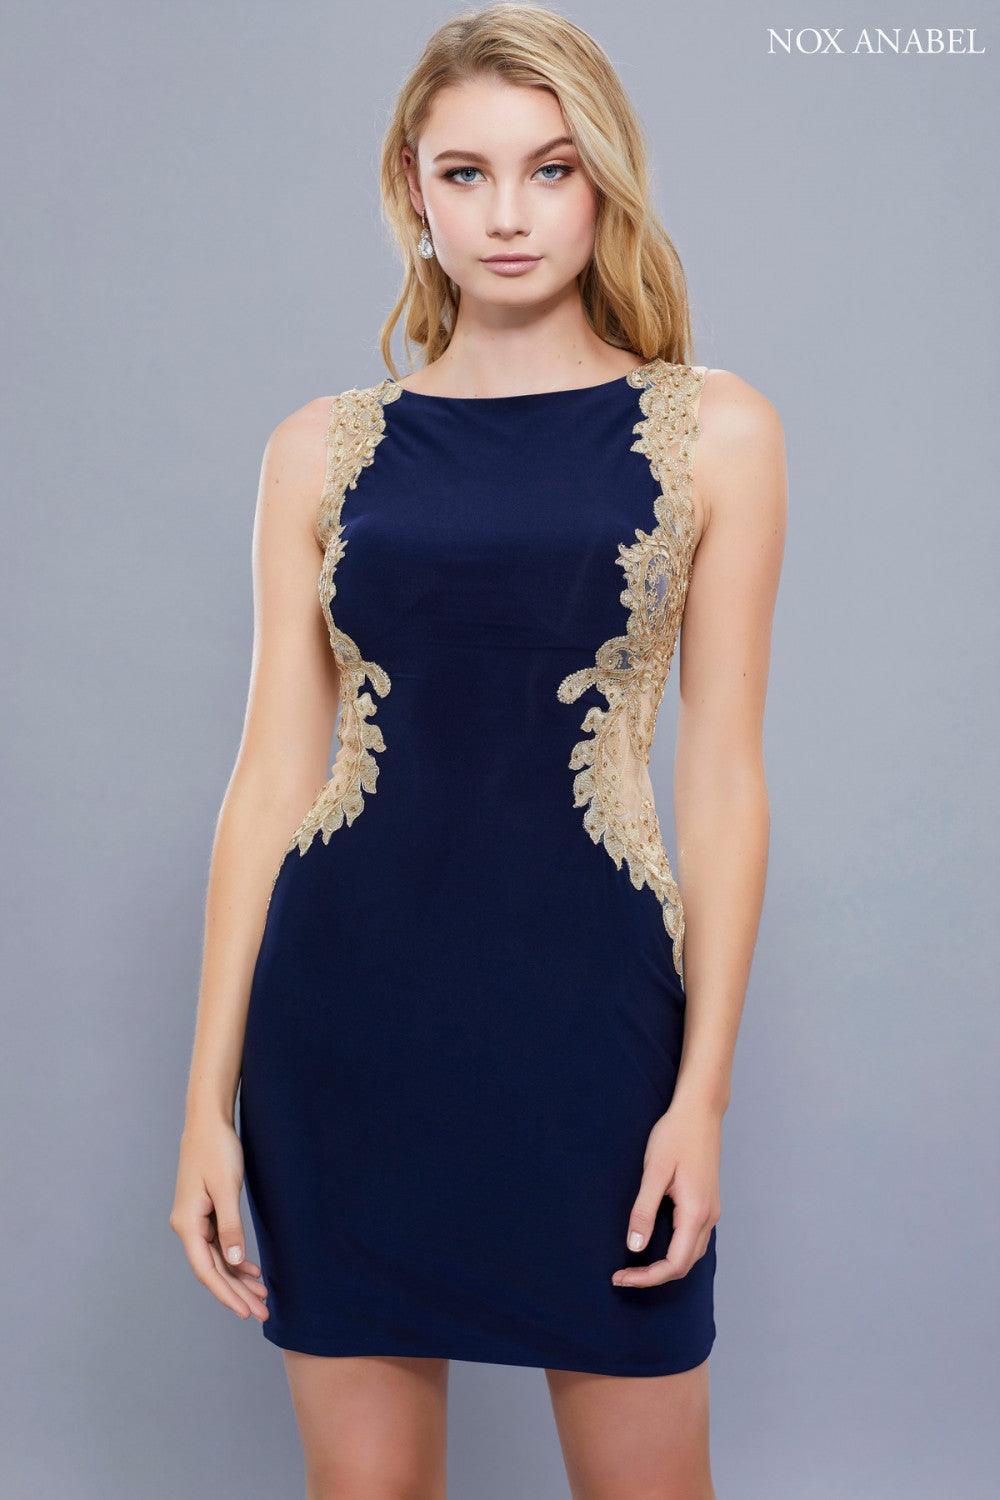 Short Beaded Prom Cocktail Dress Sexy Back - The Dress Outlet Nox Anabel